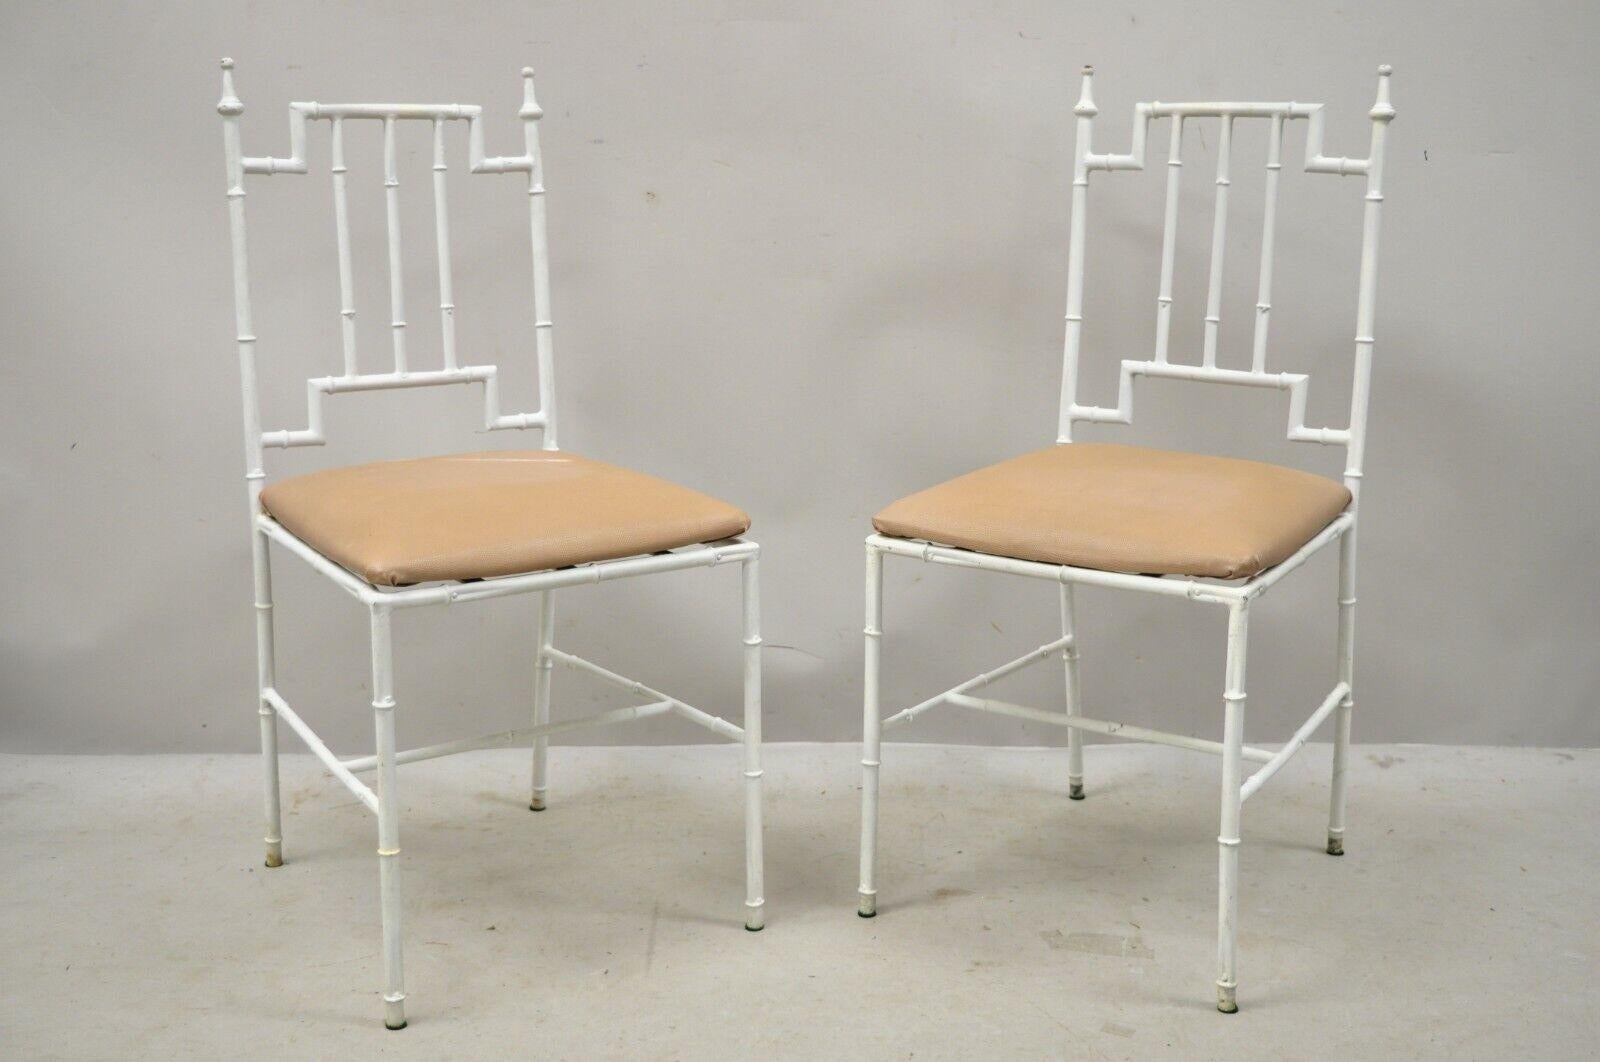 Pair of vintage Italian Hollywood Regency white faux bamboo metal accent side chairs, circa mid-20th century. Measurements: 34.5